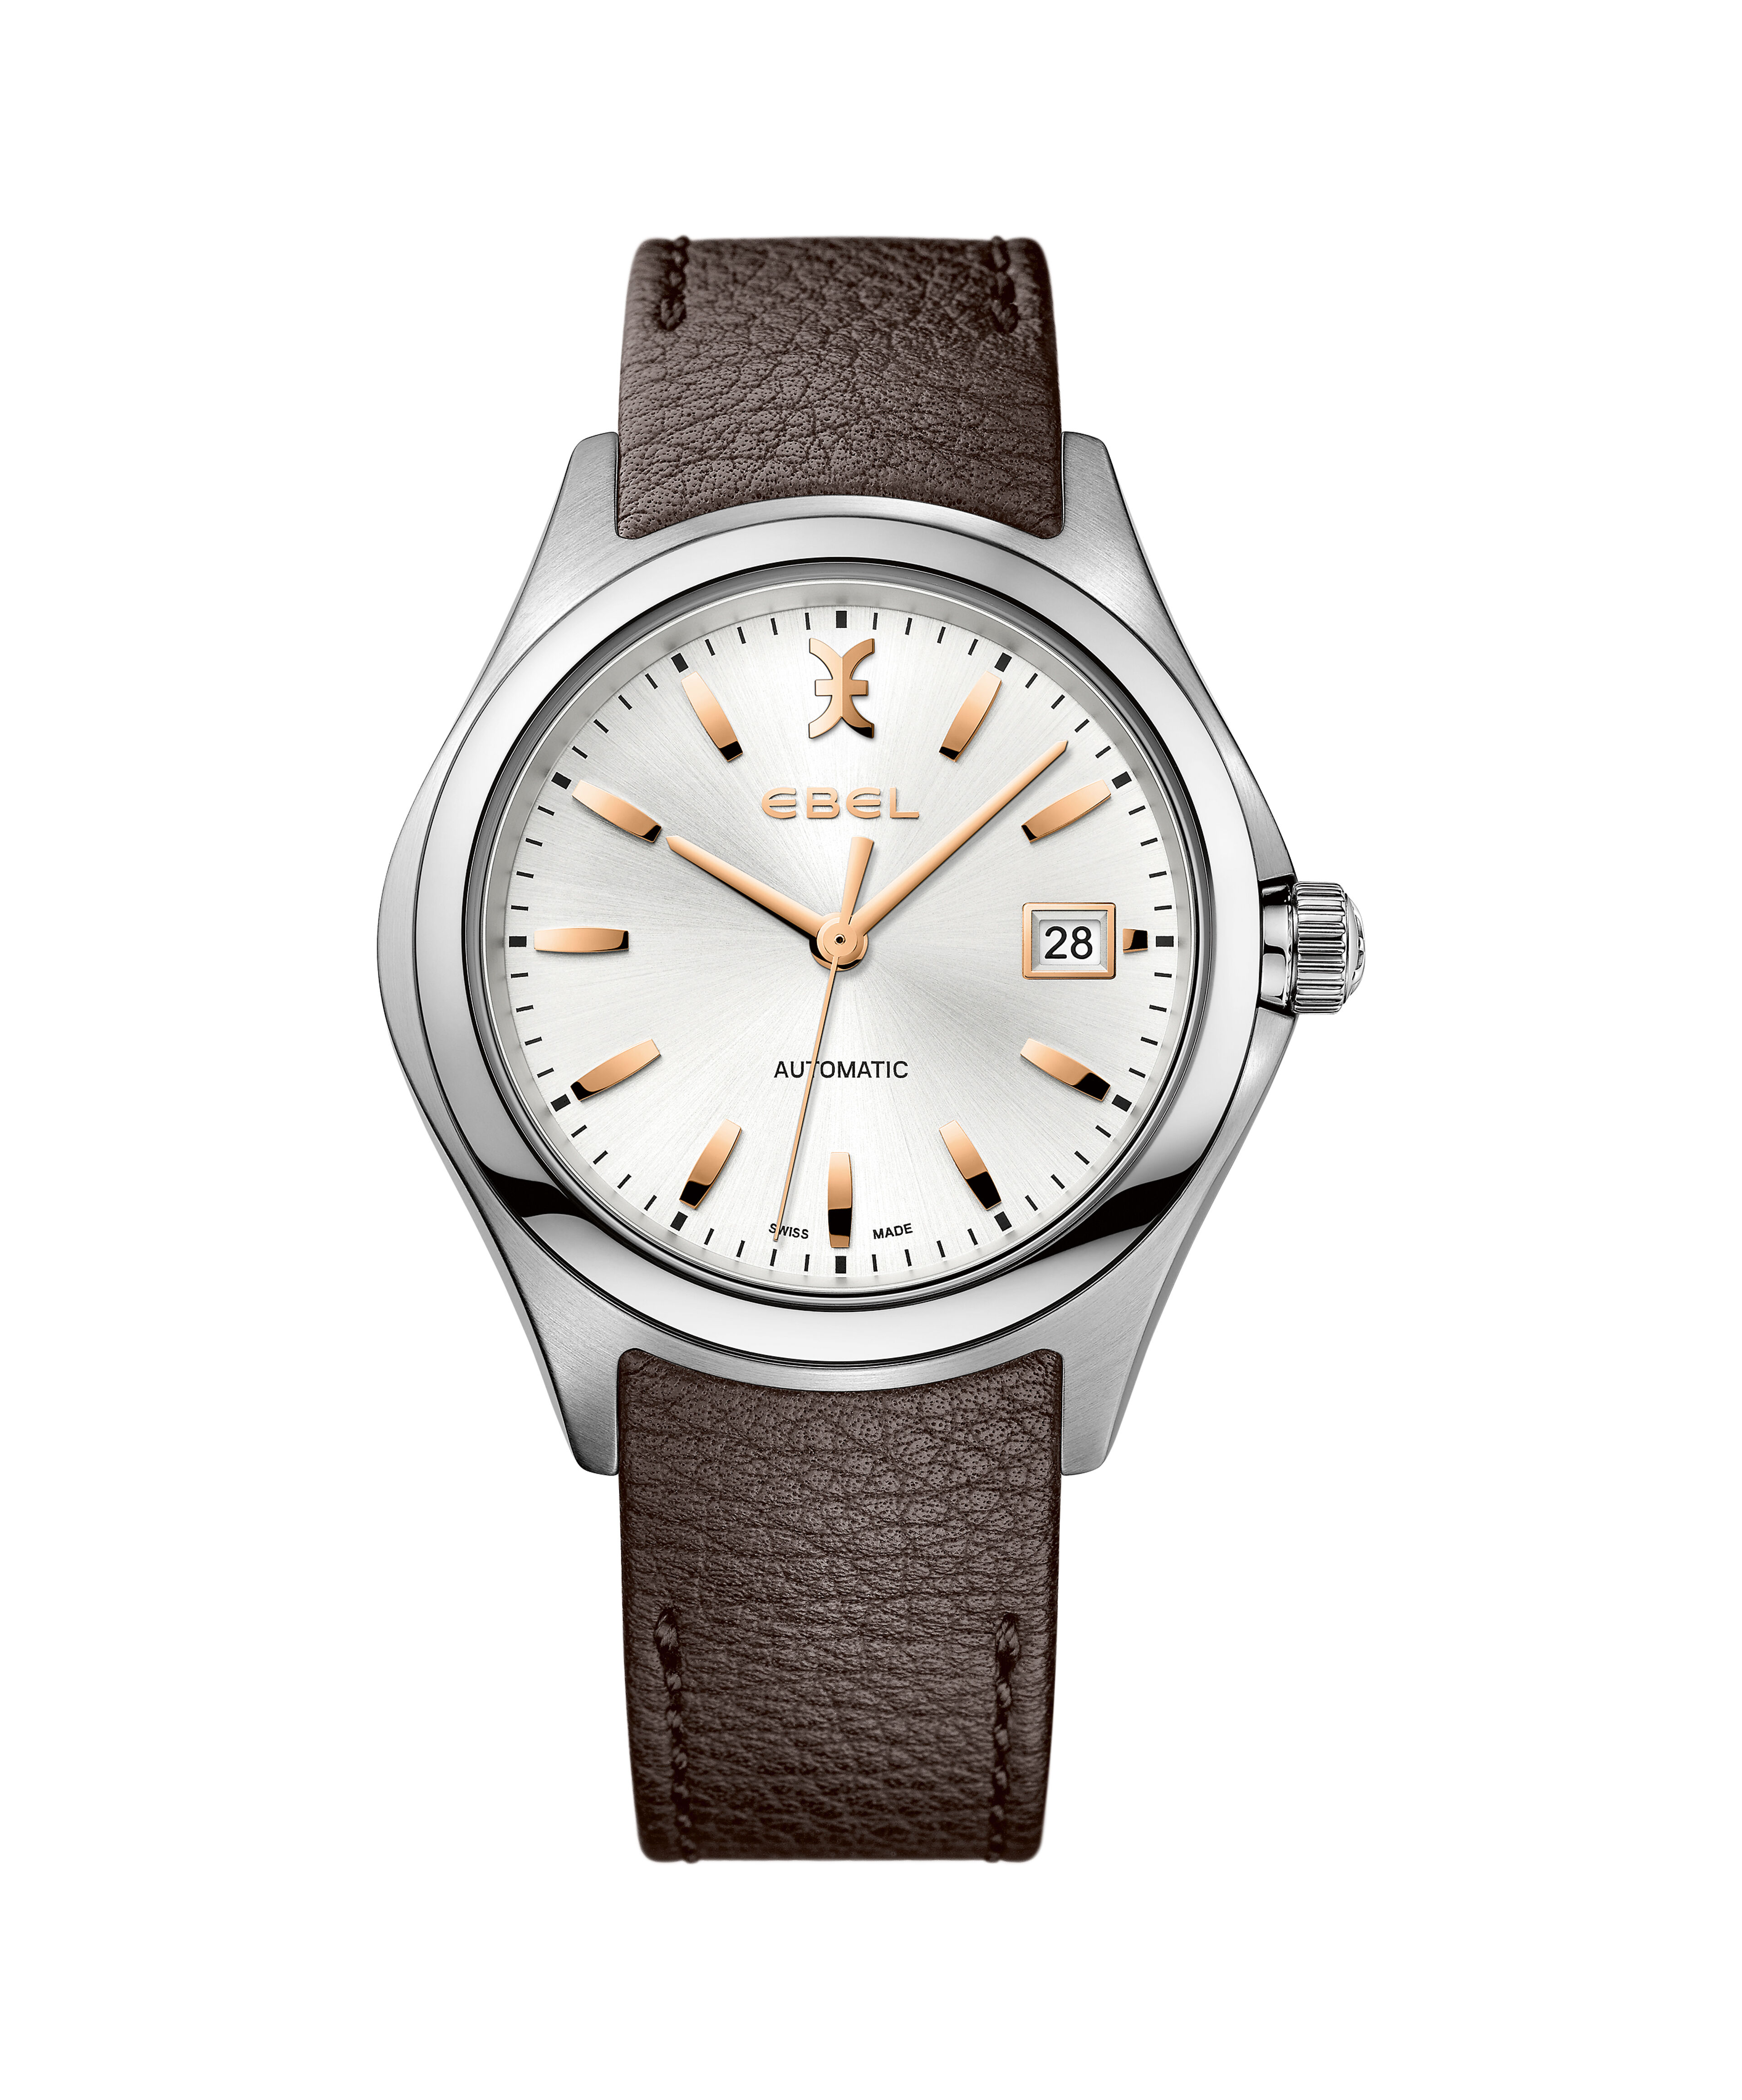 Raymond Weil Replications Watches